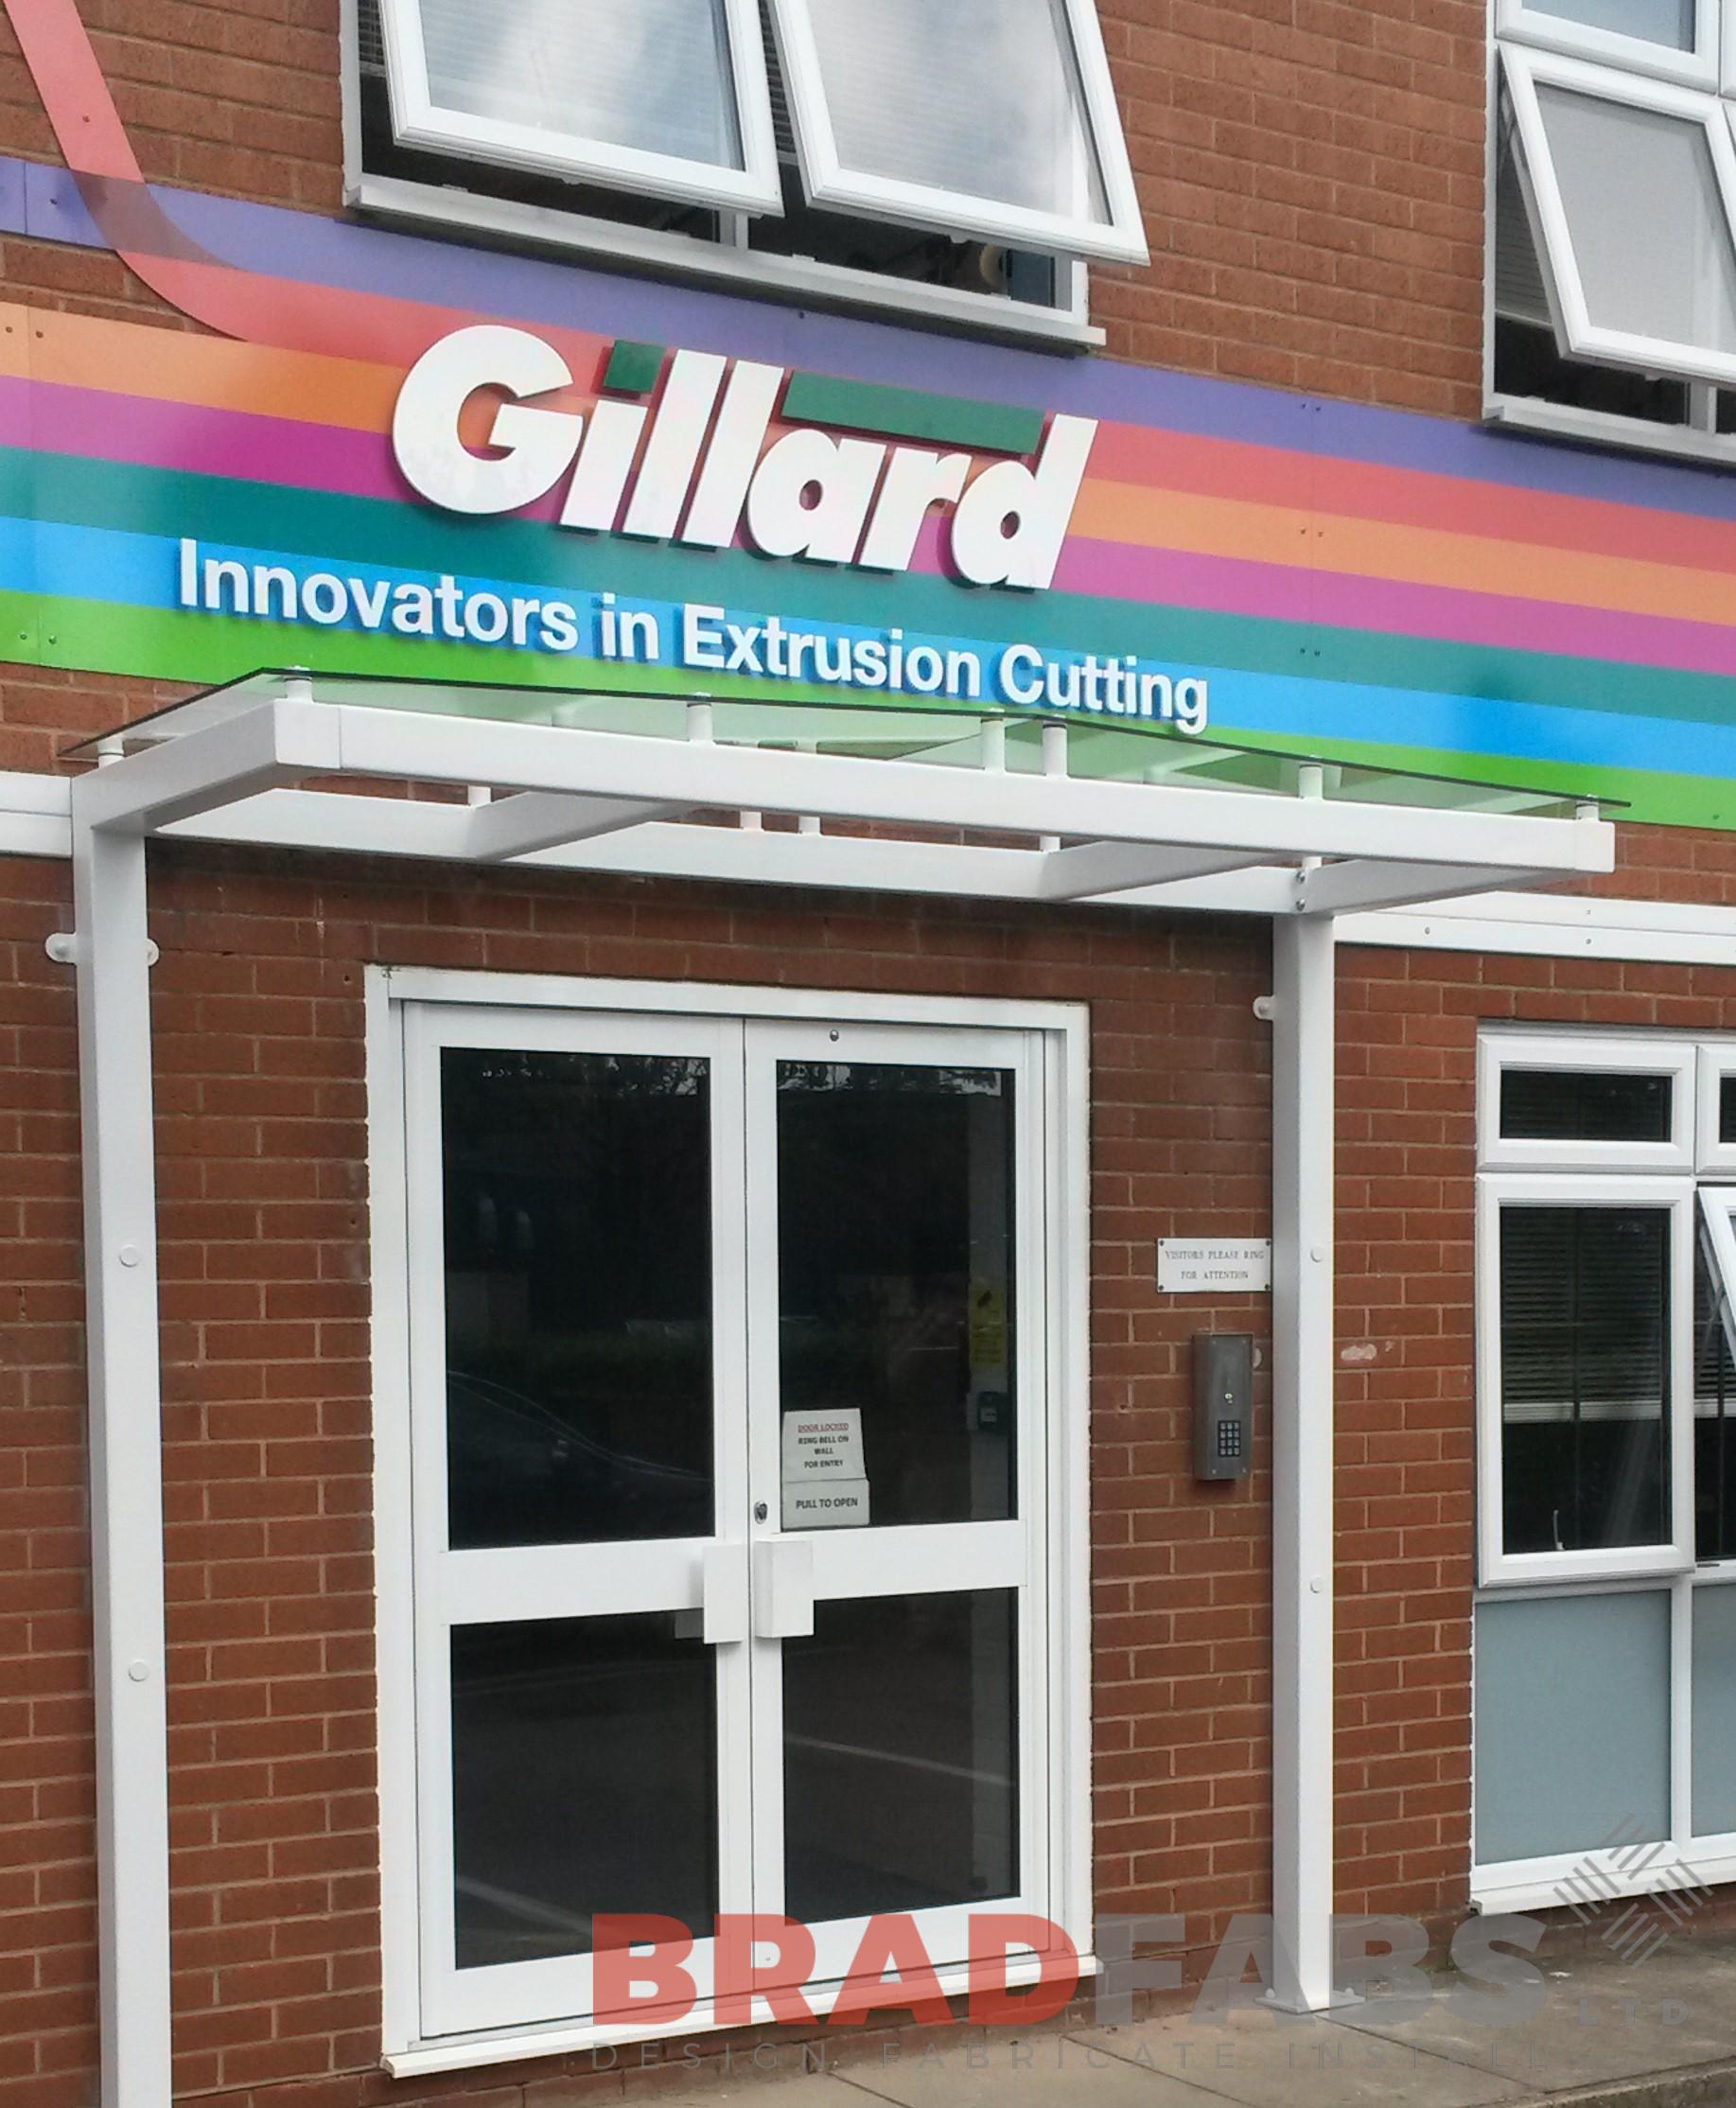 Improve the look of your business entrance with a Bradfabs Canopy